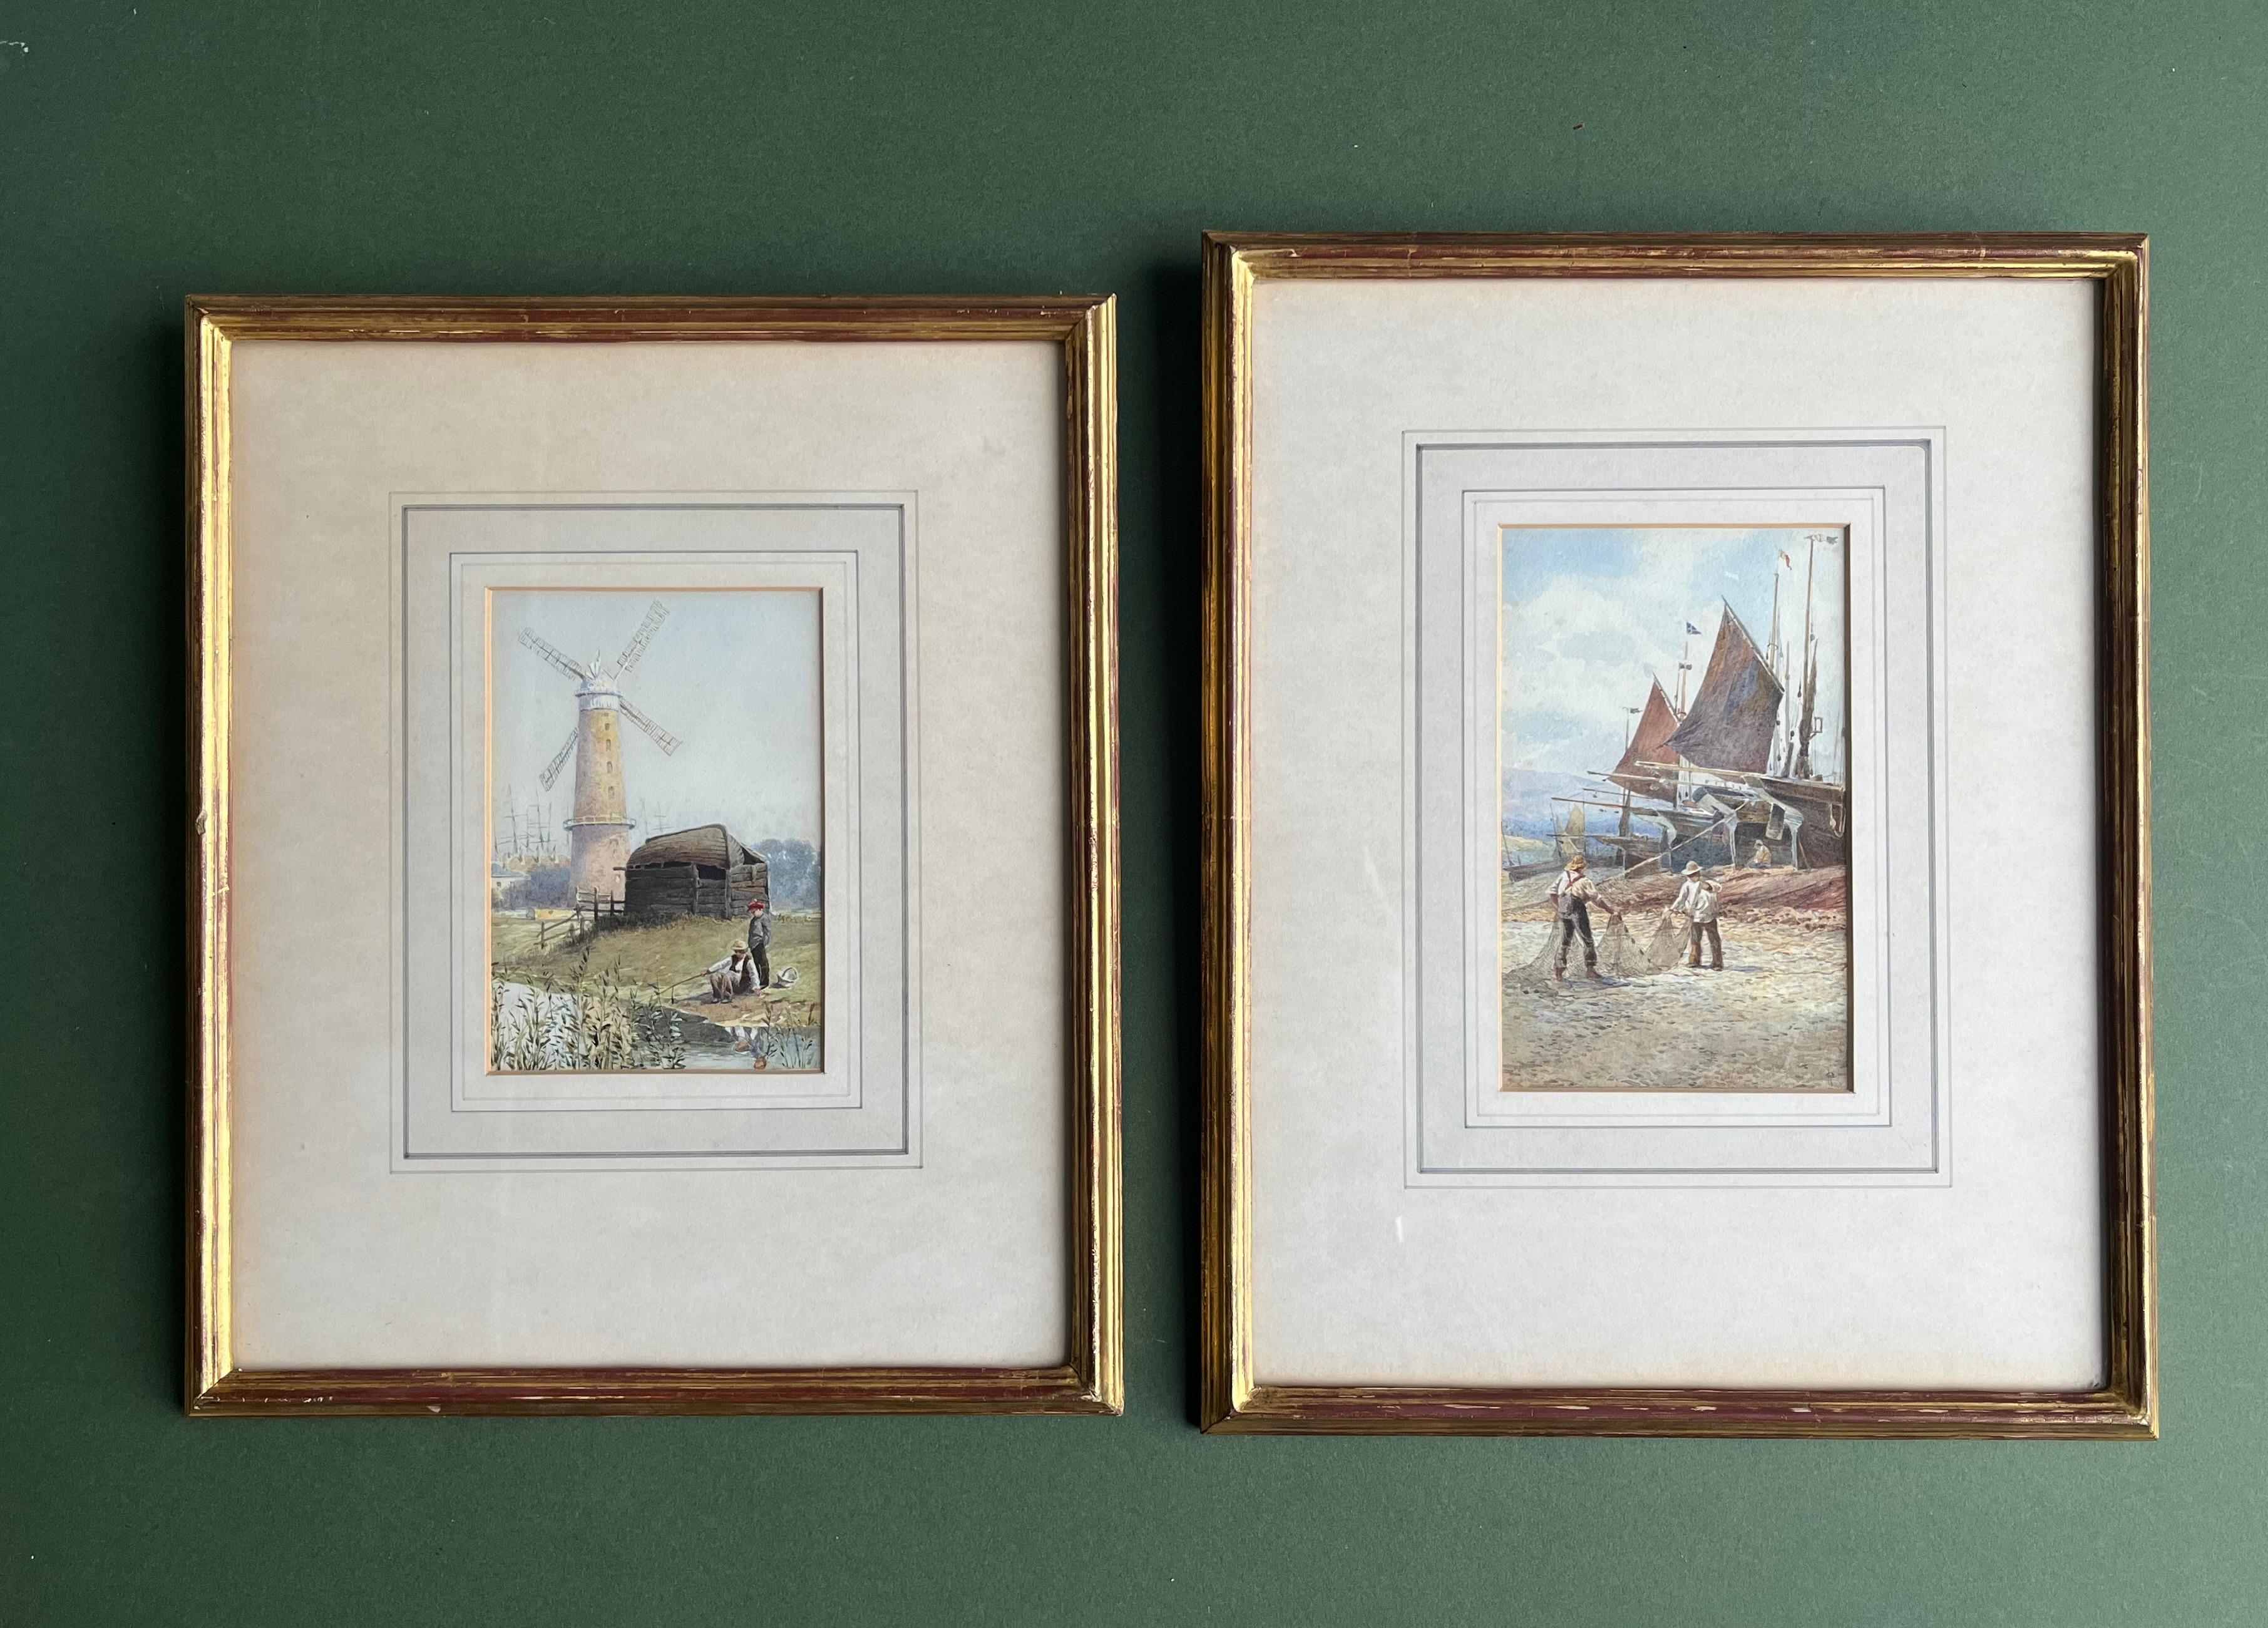 Two English watercolours, Norfolk Windmill; Fishermen mending nets on the shore - Art by Charles Robertson